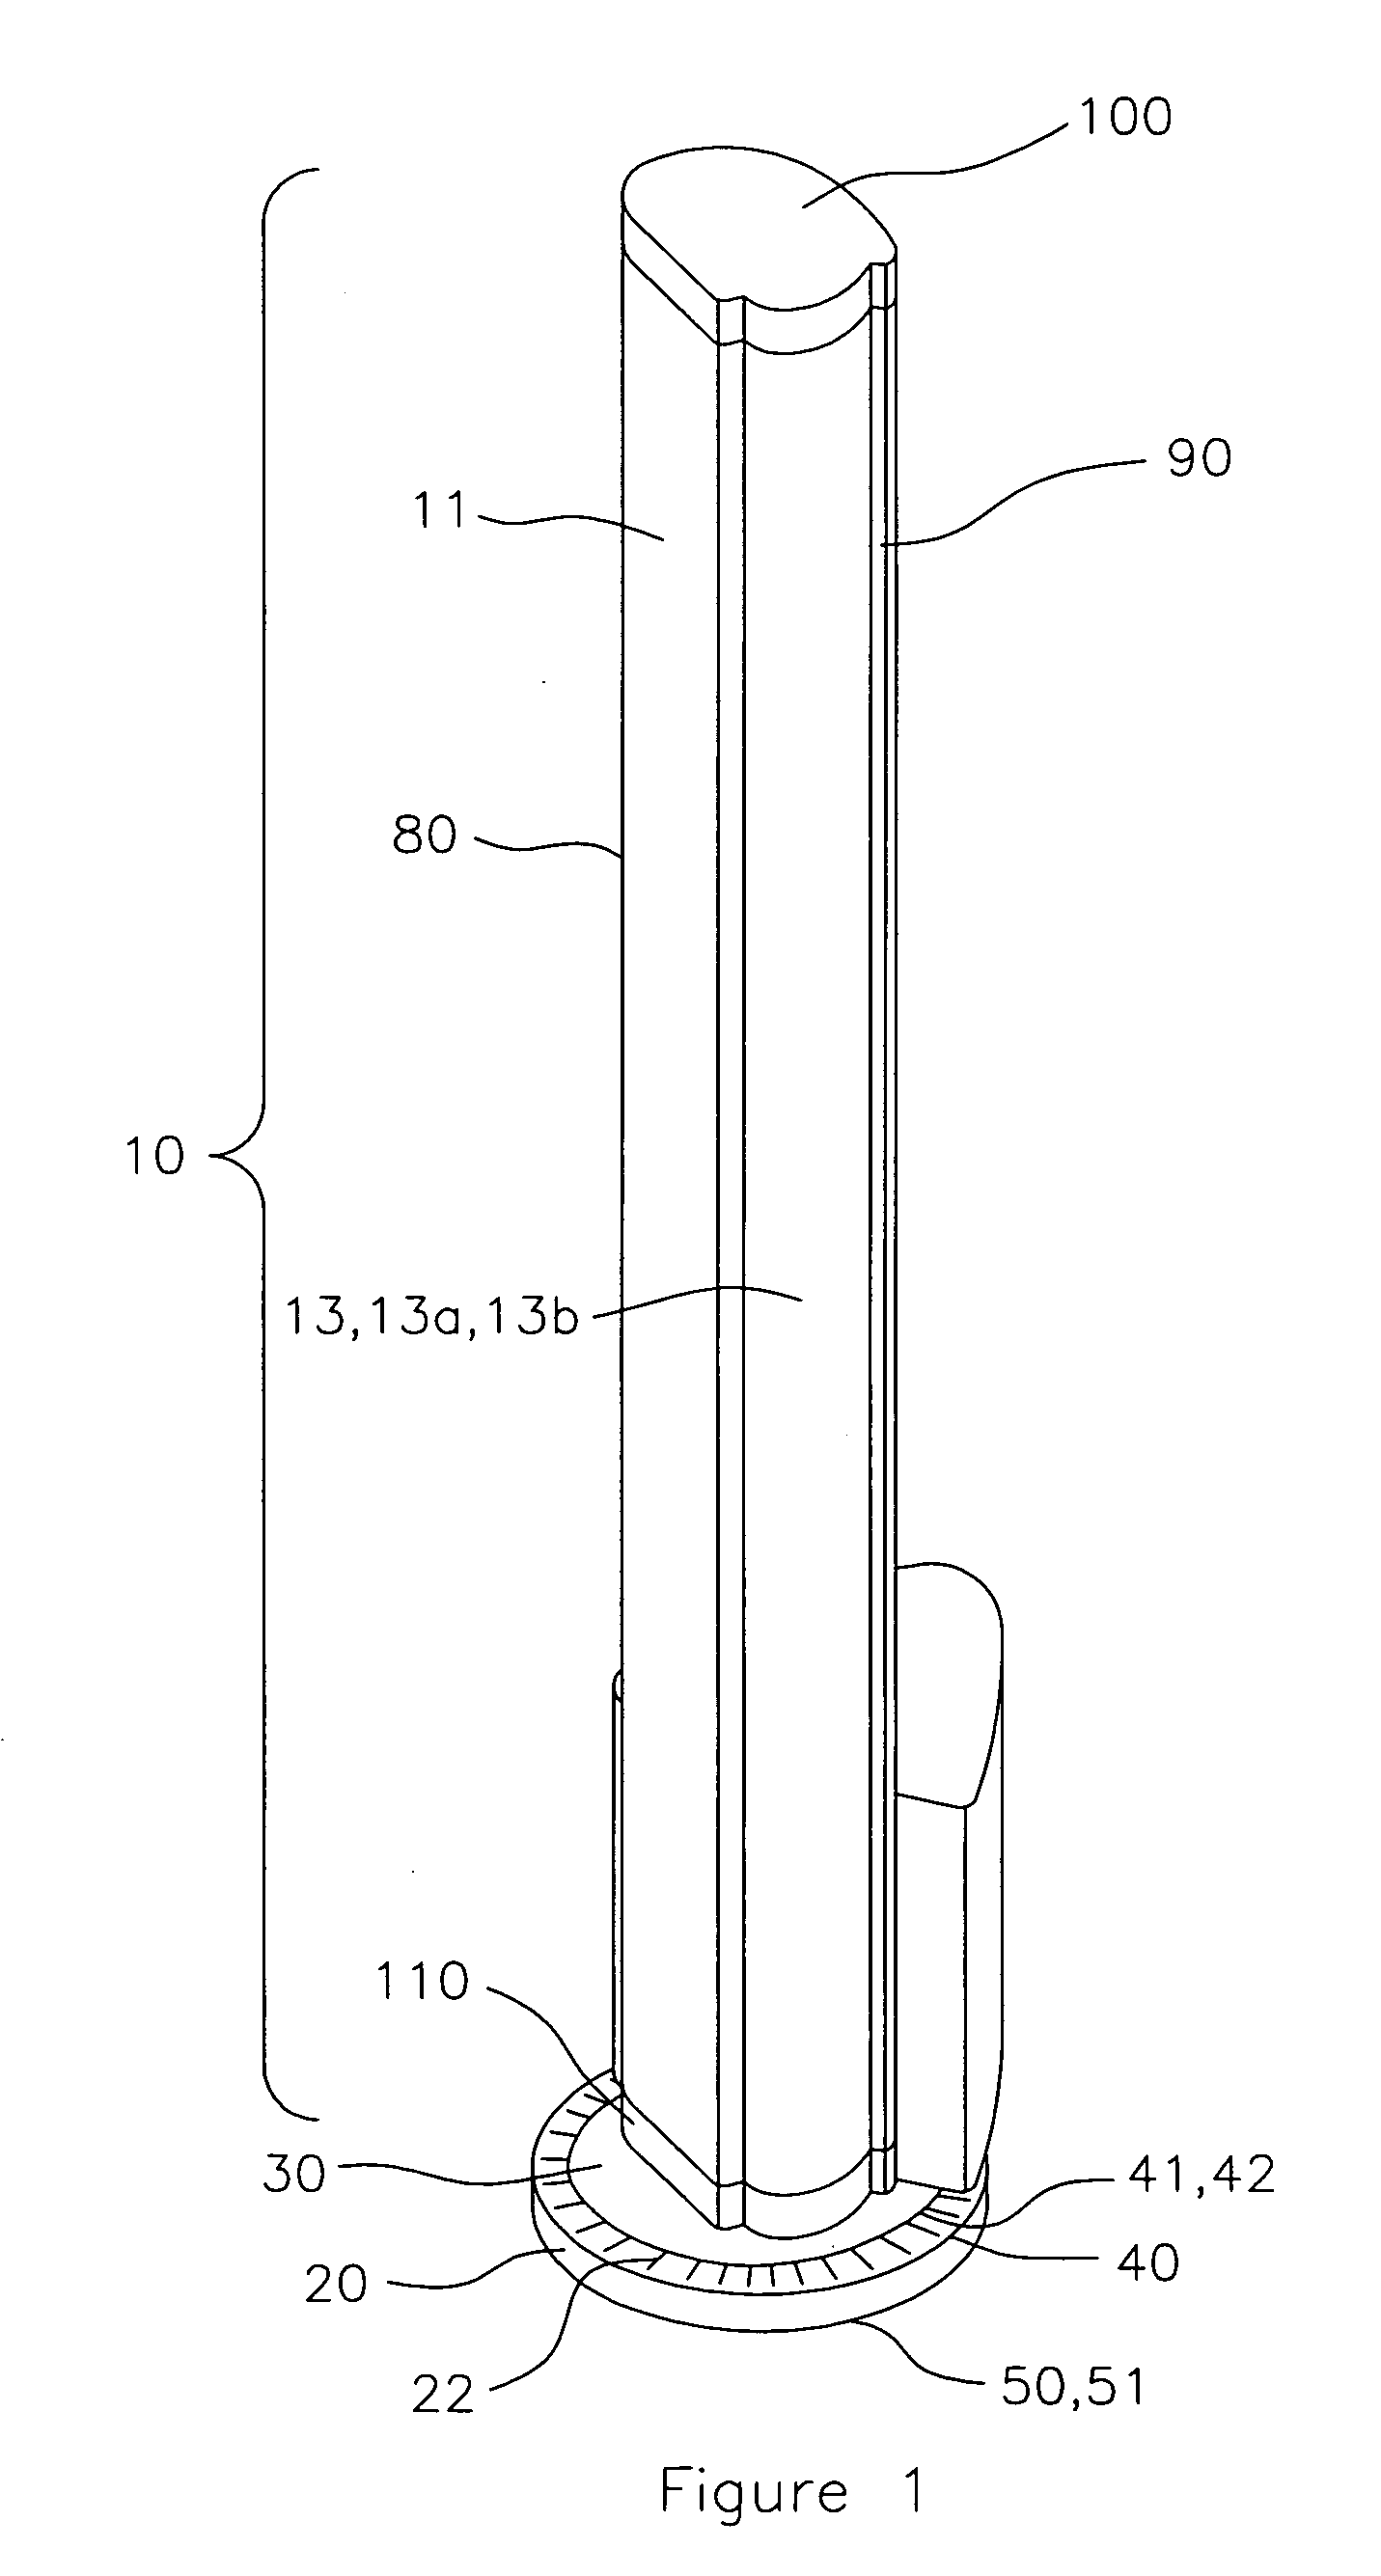 Surround sound positioning tower system and method